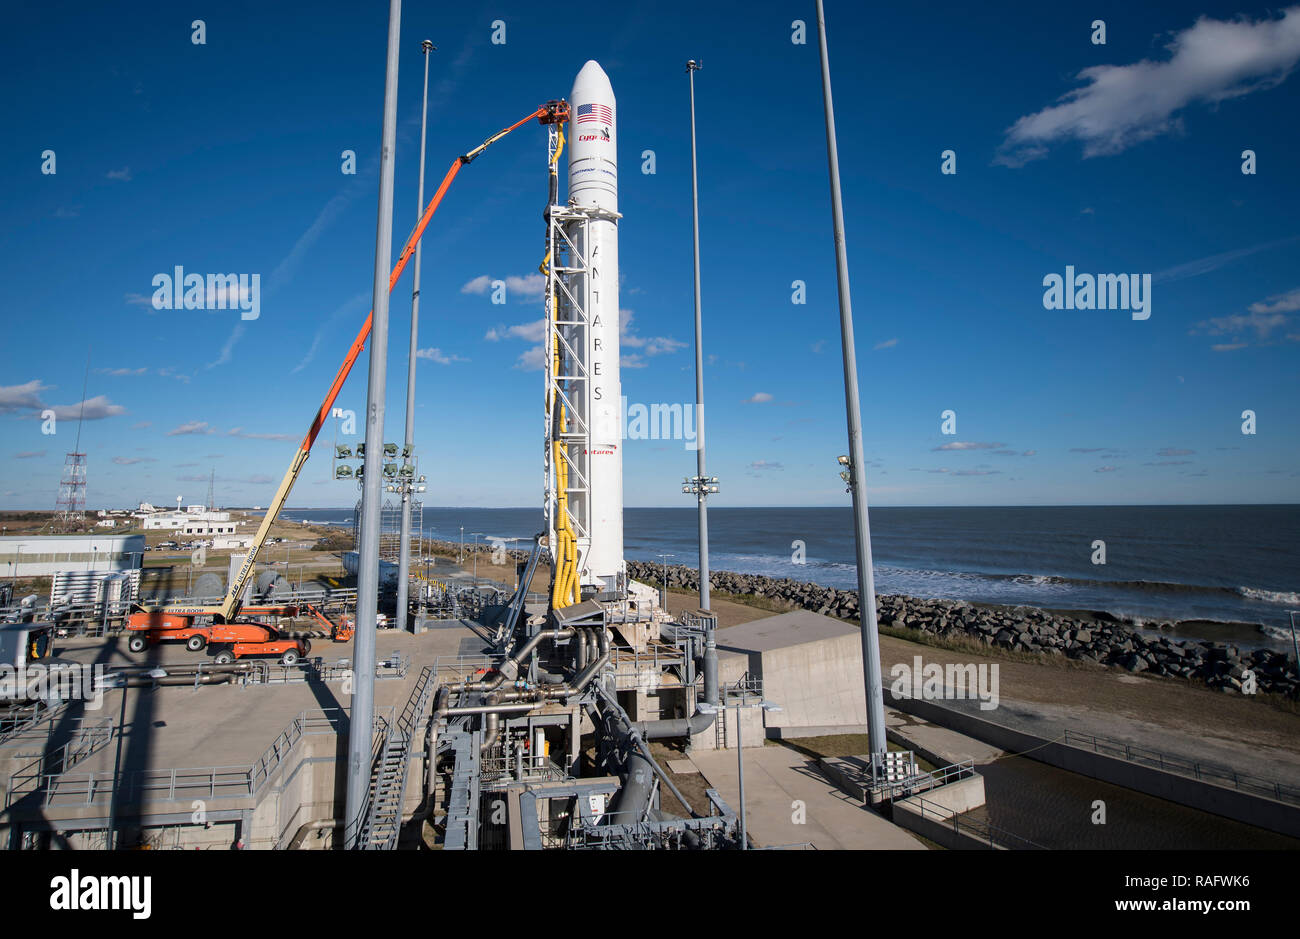 The Northrop Grumman Antares rocket, with Cygnus resupply spacecraft onboard, is prepared for launch on Pad-0A at the NASA Wallops Flight Facility November 16, 2018  in Wallops, Virginia. The commercial cargo resupply mission will carrying 7,400 pounds of supplies and equipment to the International Space Station. Stock Photo